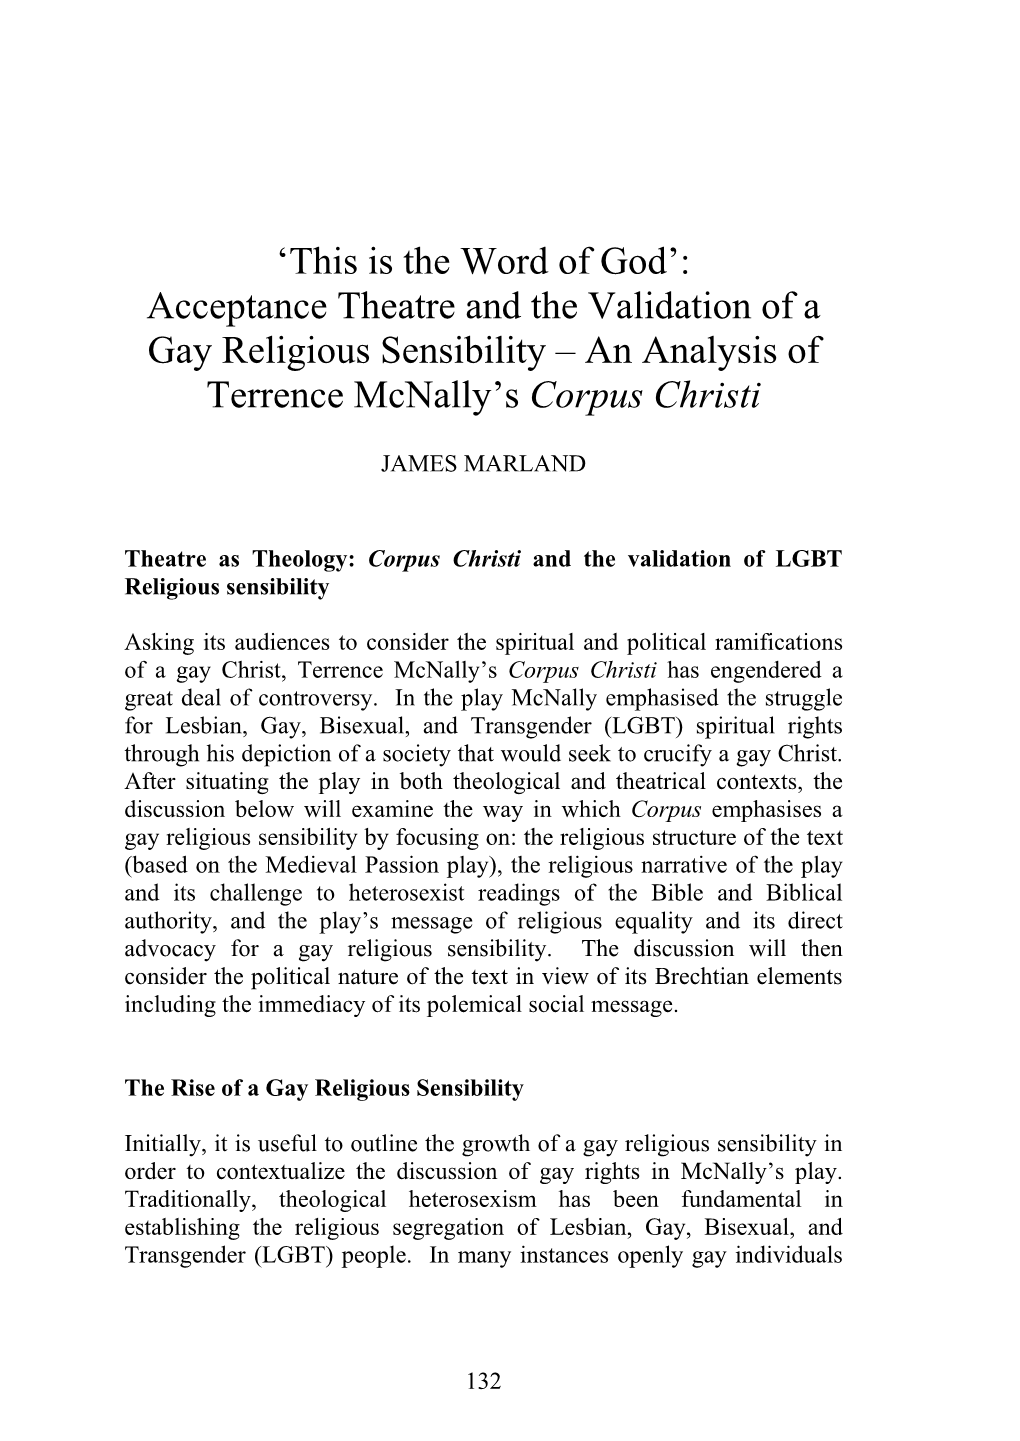 Acceptance Theatre and the Validation of a Gay Religious Sensibility – an Analysis of Terrence Mcnally’S Corpus Christi